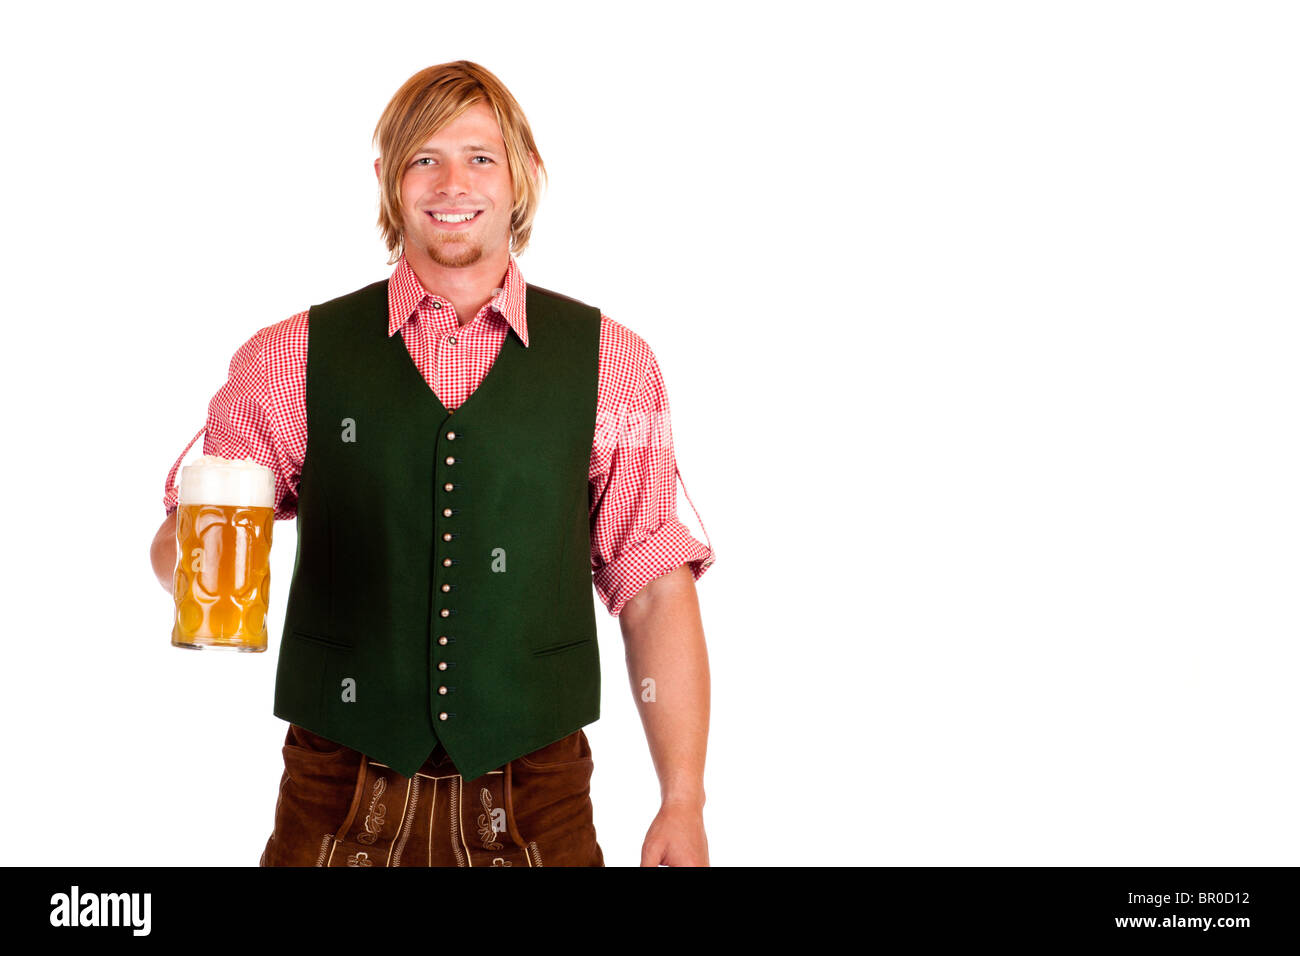 Bavarian man with leather trousers (lederhose) holds Oktoberfest beer stein in hand. Isolated on white background. Stock Photo